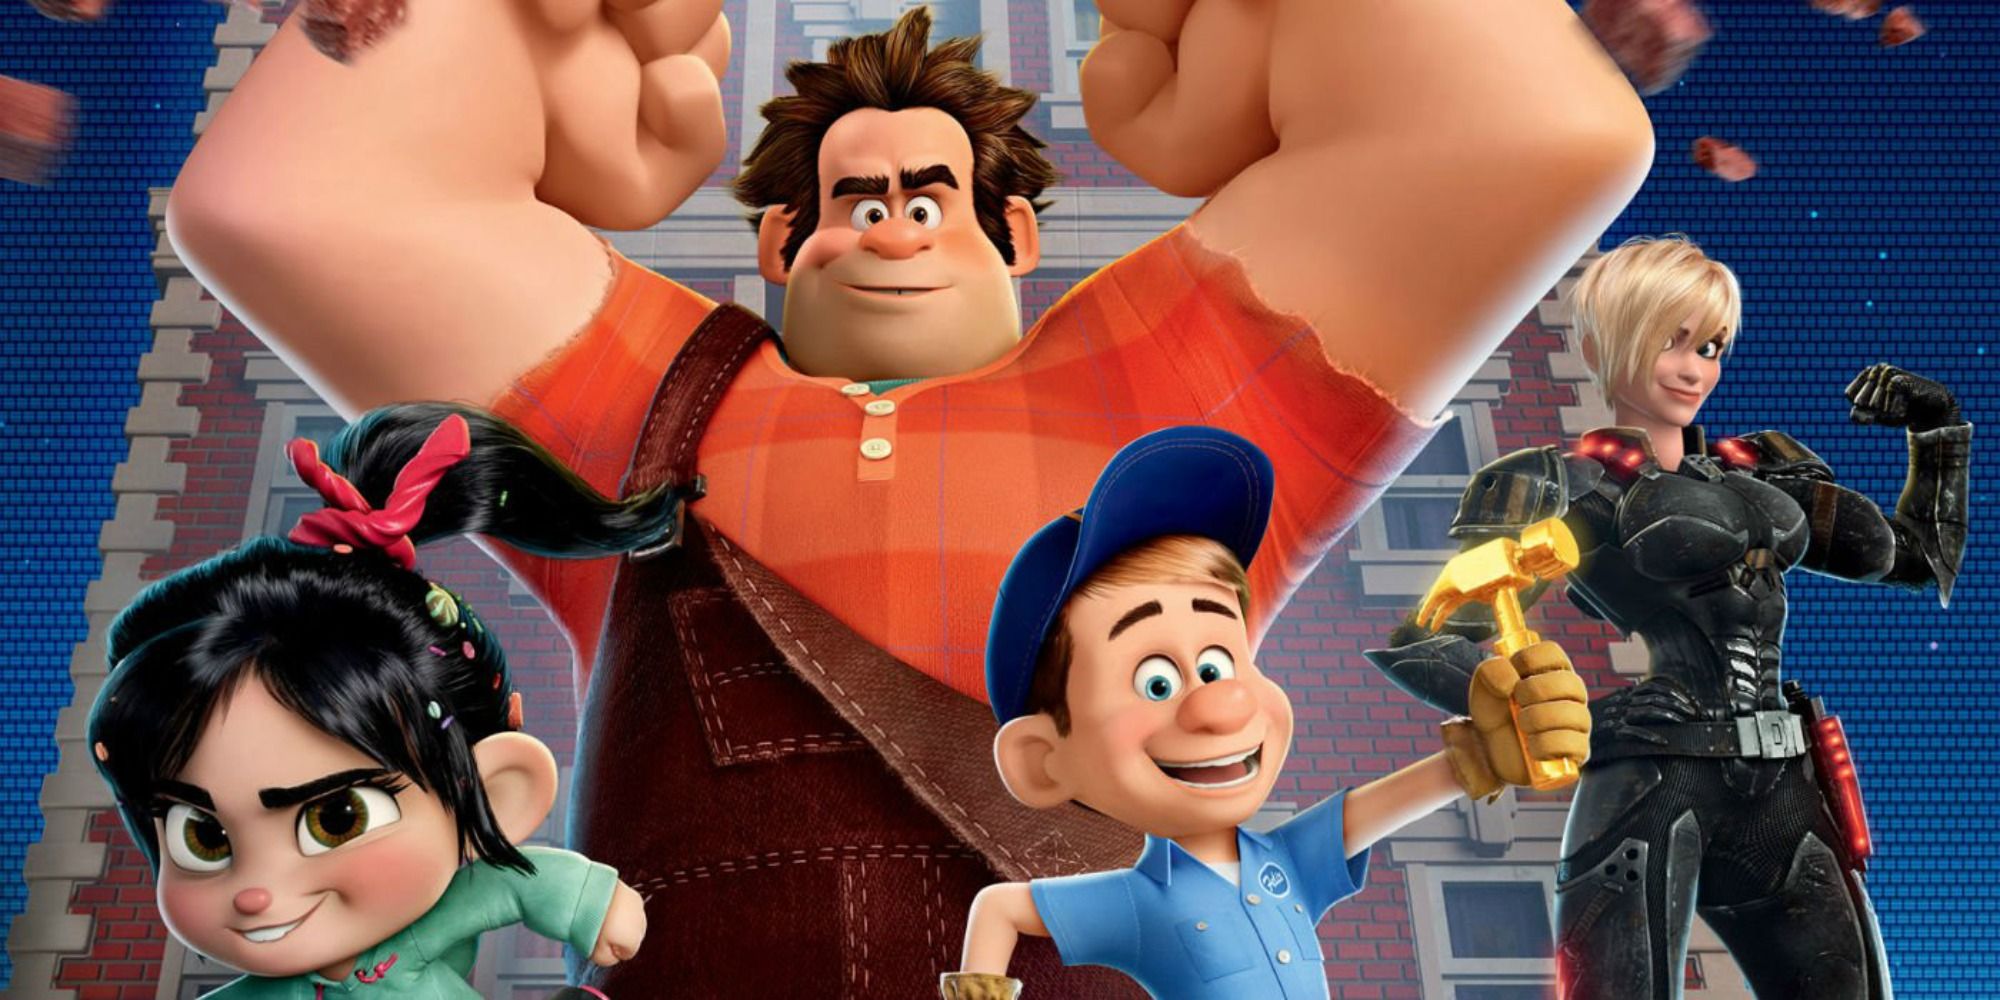 Wreck It Ralph characters posing together